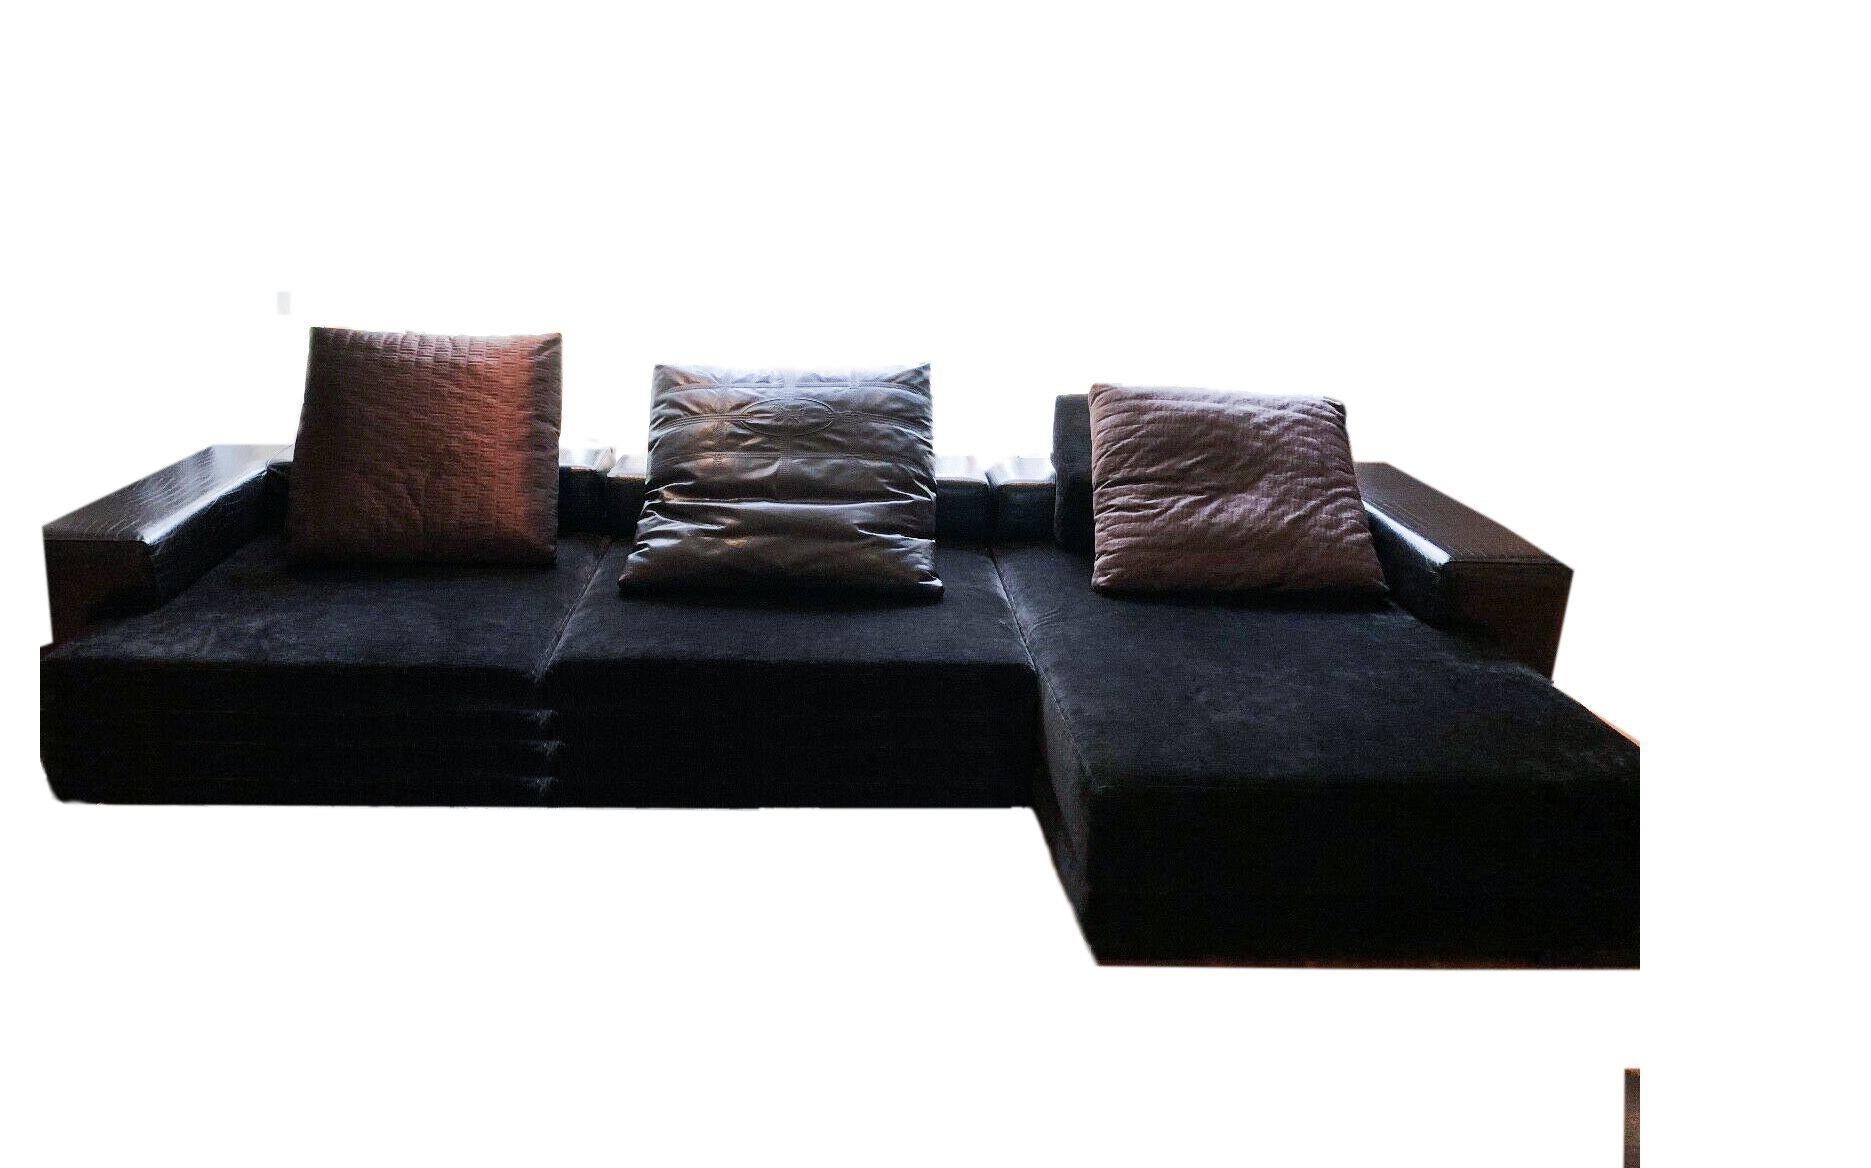 Gorgeous custom Fendi Domino three sofa set, crocodile back and arms, textile seats, adjustable backrests, 3 large Fendi pillows. Labelled. Retail price for this piece was over 32,000 USD.